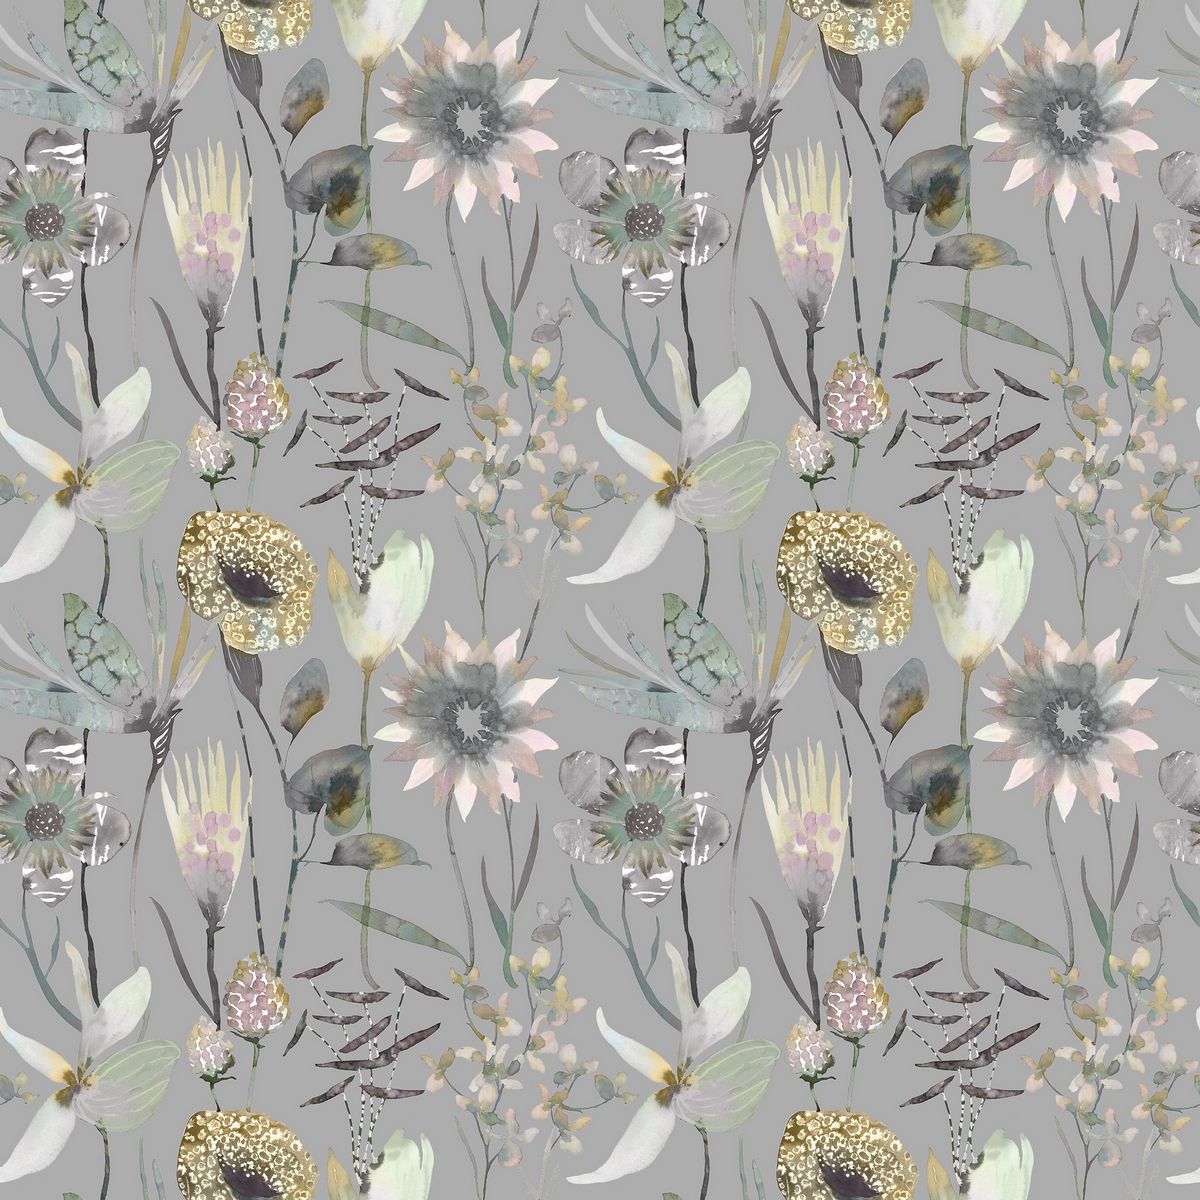 Oceania Dawn Fabric by Voyage Maison